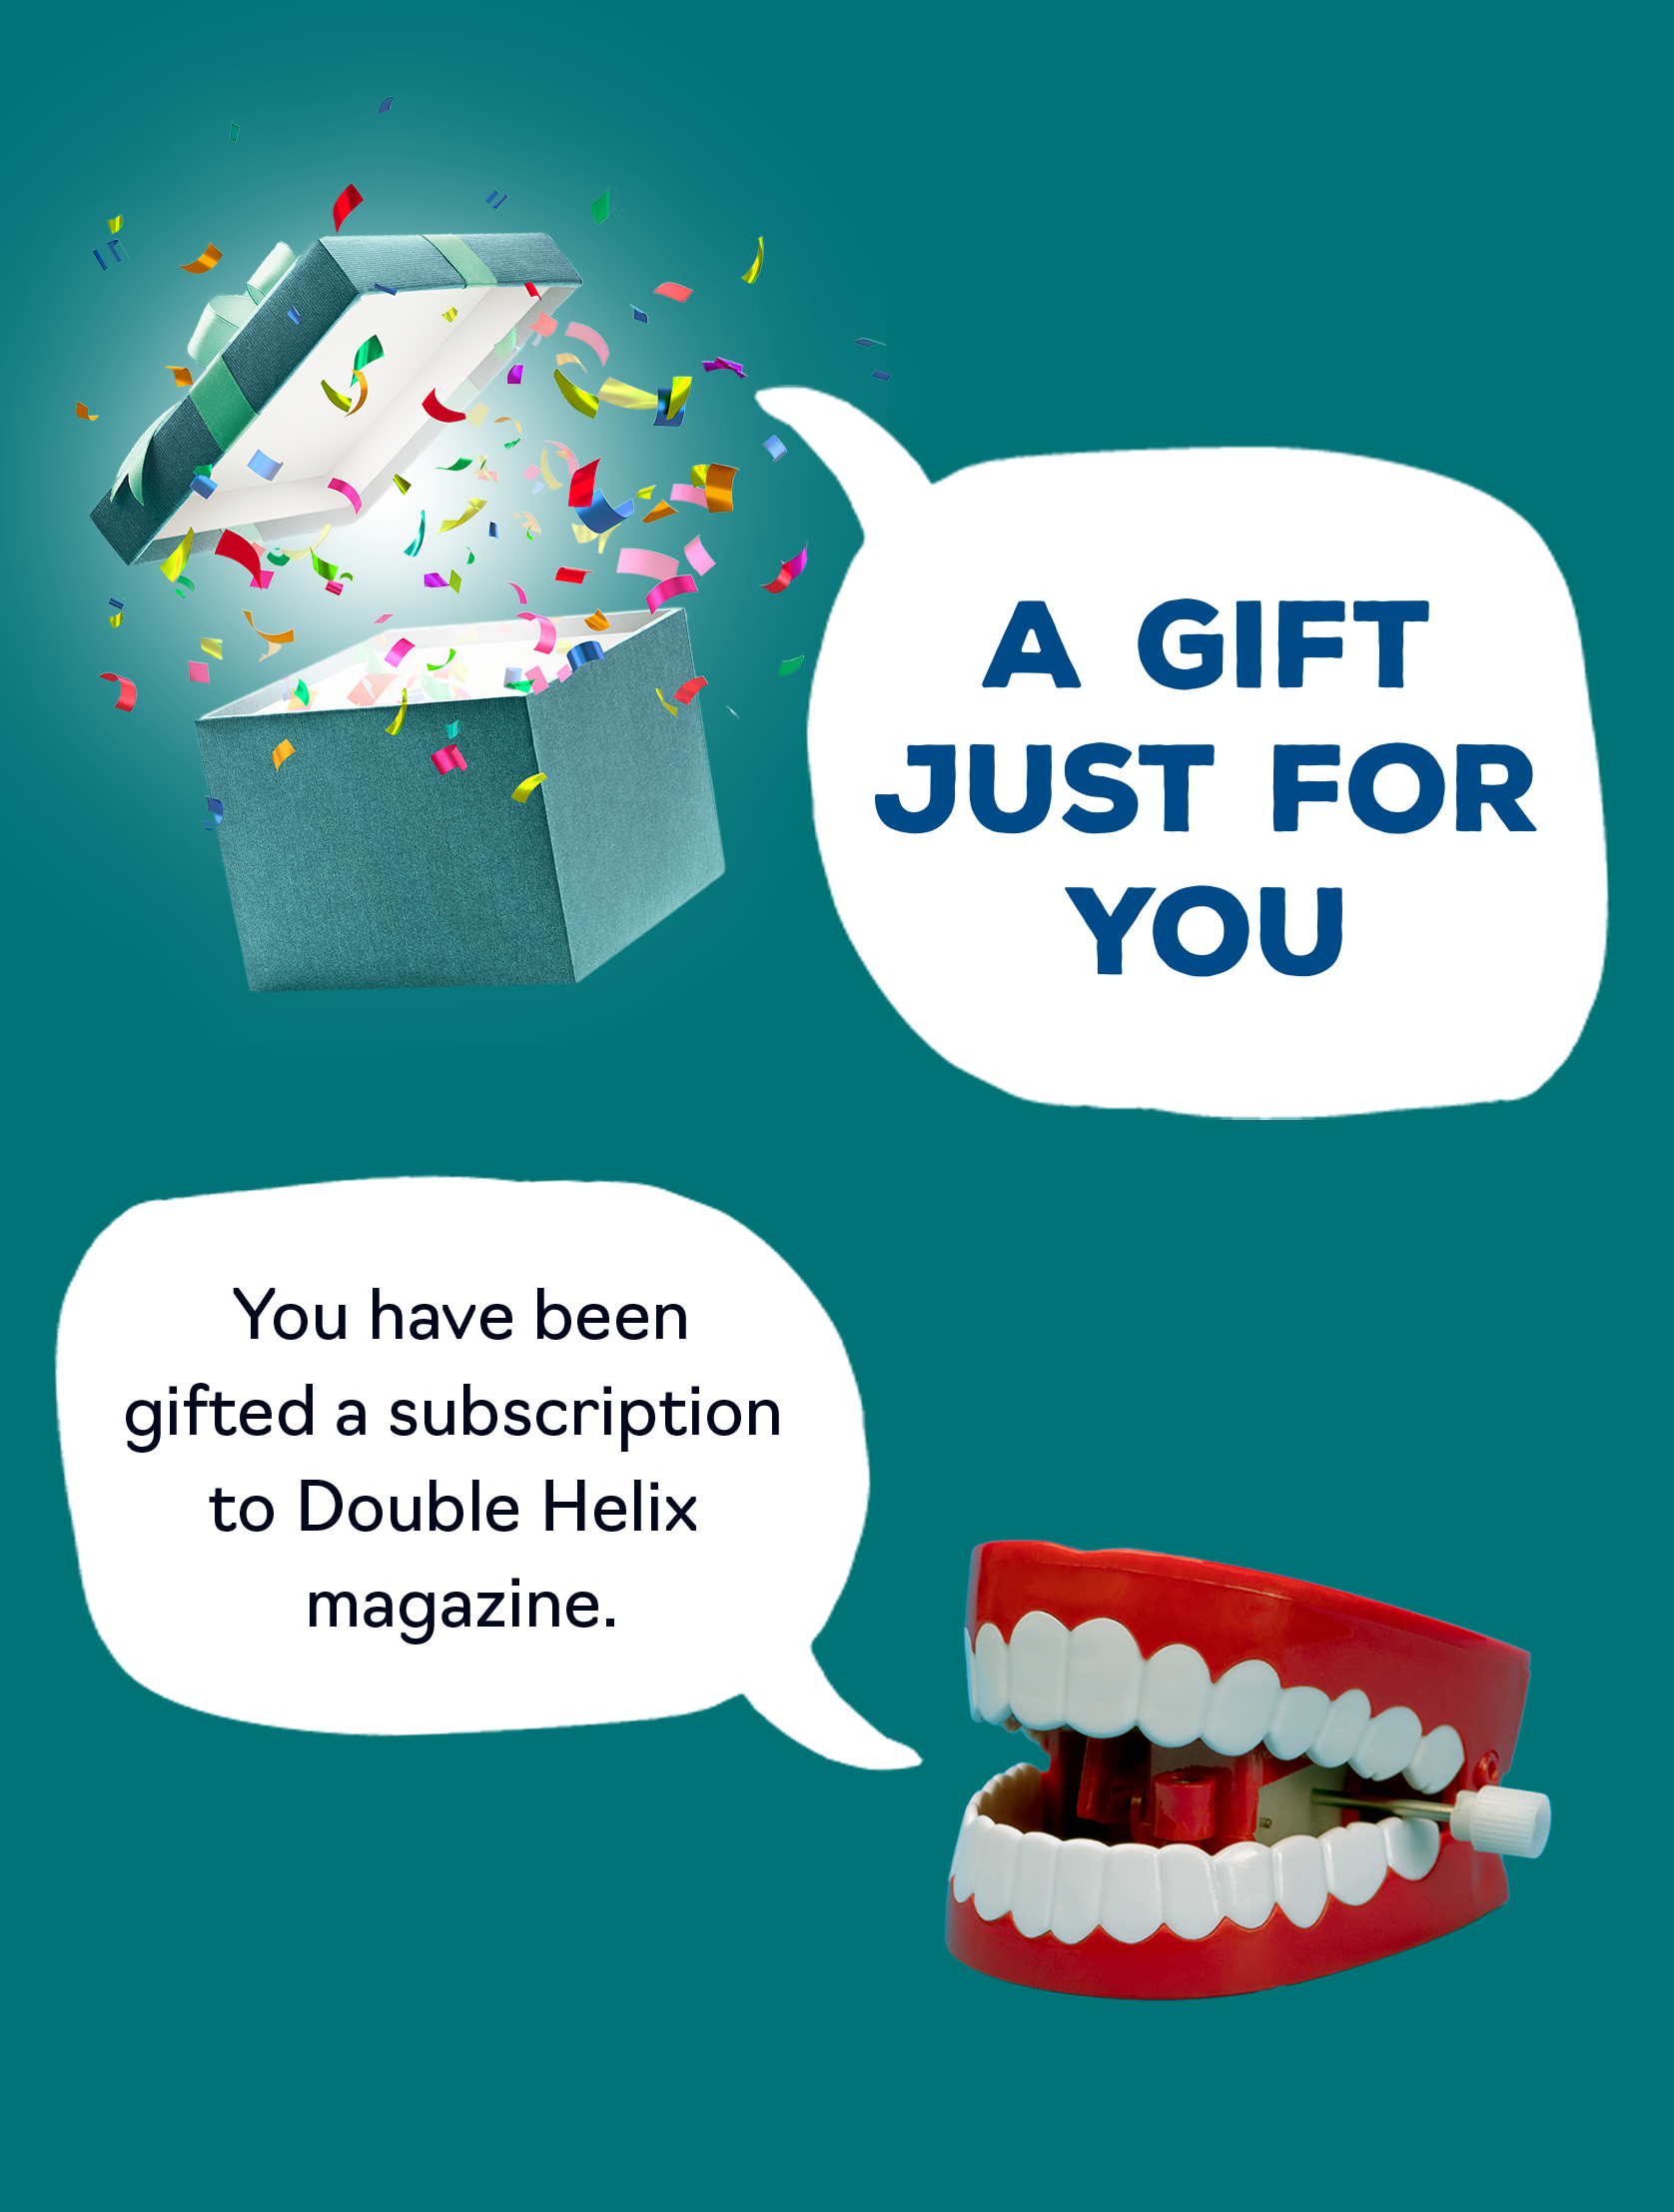 Ad for gift subscriptions - A gift just for you - You have been gifted a subscription to Double Helix magazine